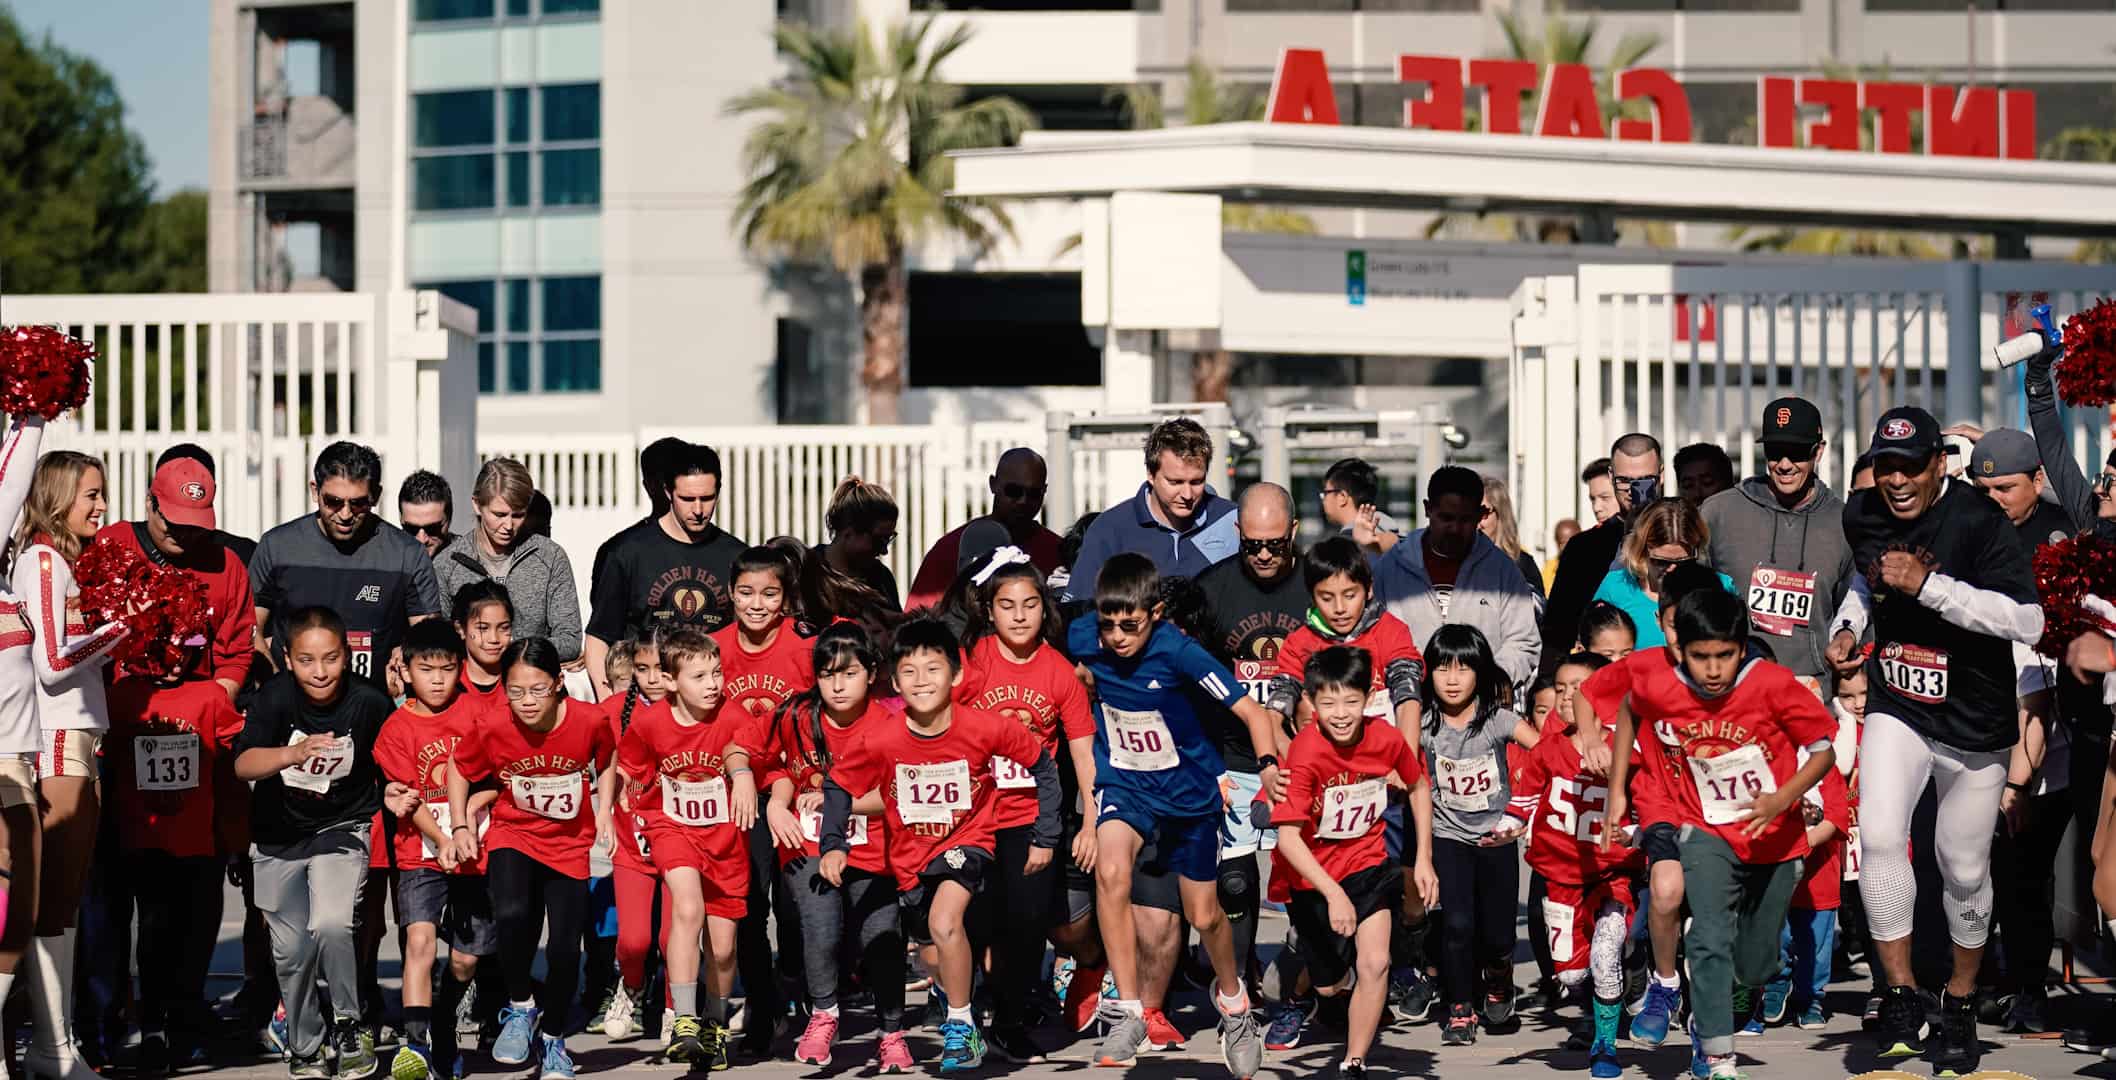 A large group of children depart the starting line of the 2019 marathon.